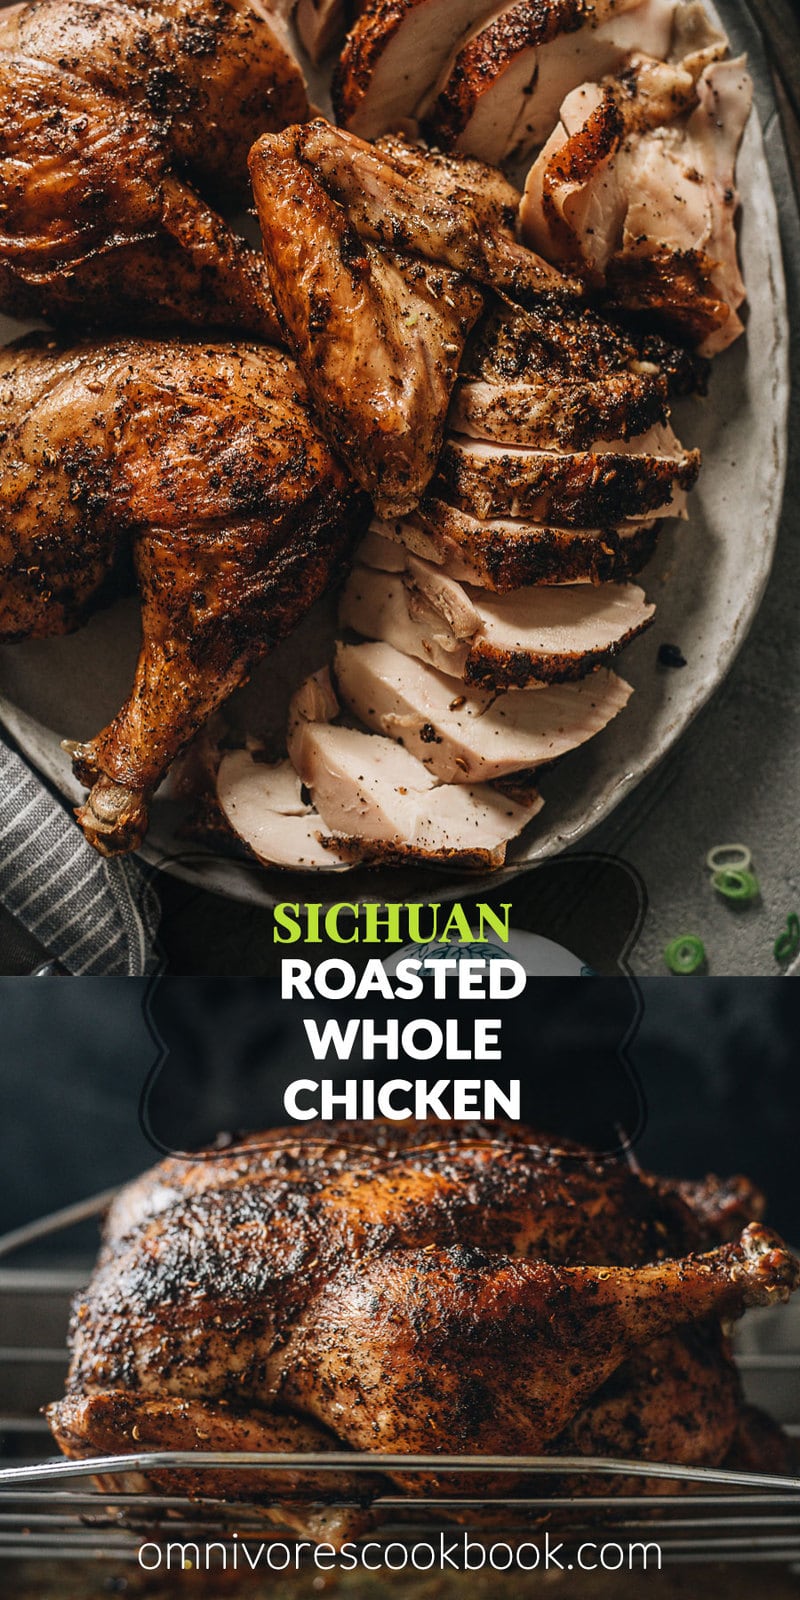 Sichuan Roasted Whole Chicken | This recipe yields an extremely juicy and tender bird with a rich flavor and crispy skin. The chicken is rubbed with Sichuan peppercorn salt, stuffed with fresh aromatics, and oven roasted to perfection. Make this the centerpiece for your next holiday gathering or dinner party and impress everyone! {Gluten-Free adaptable}